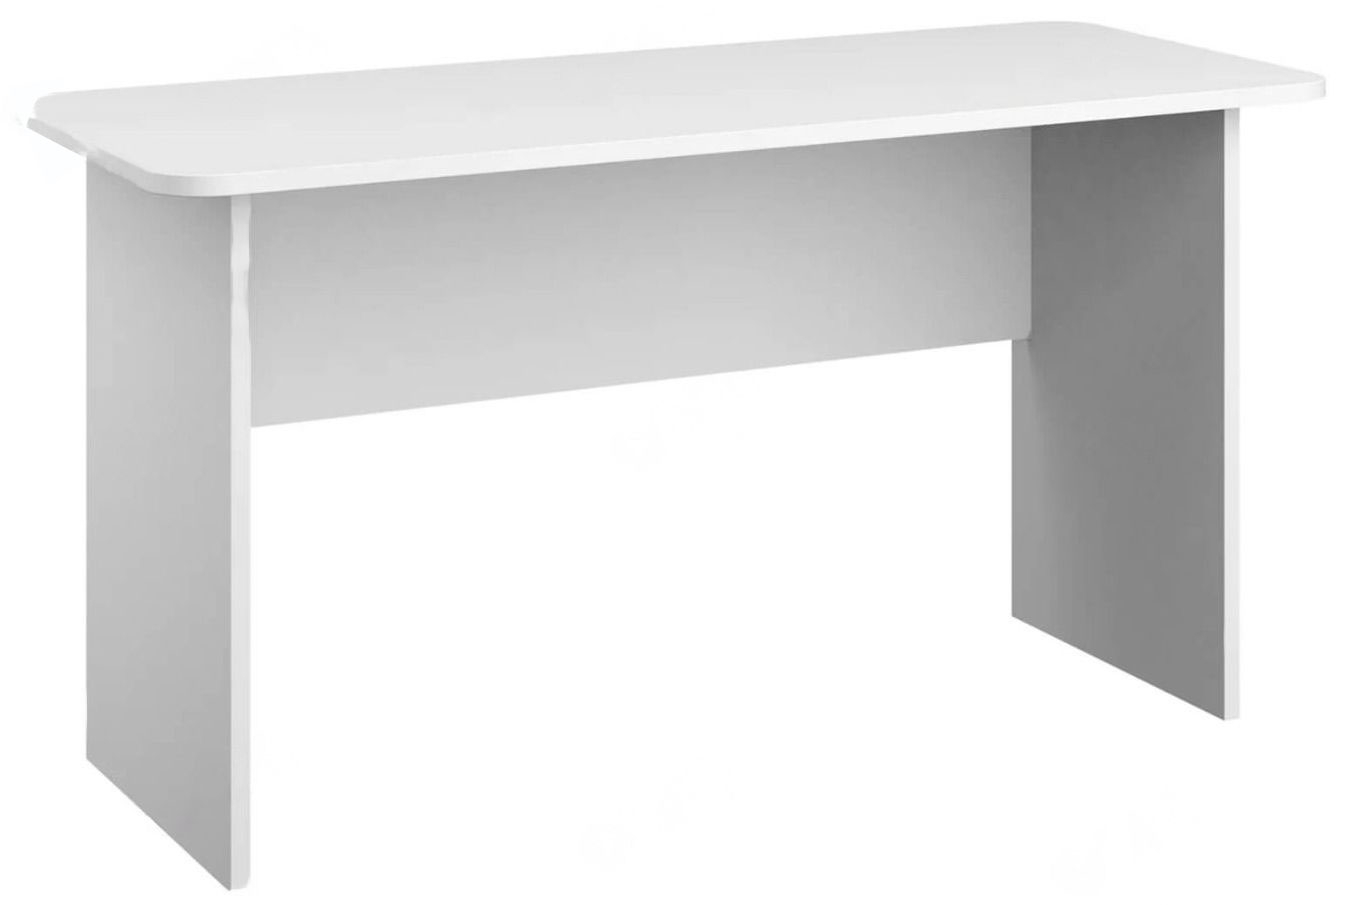 Rauch Home Office Alpine White Desk With Rounded Corners